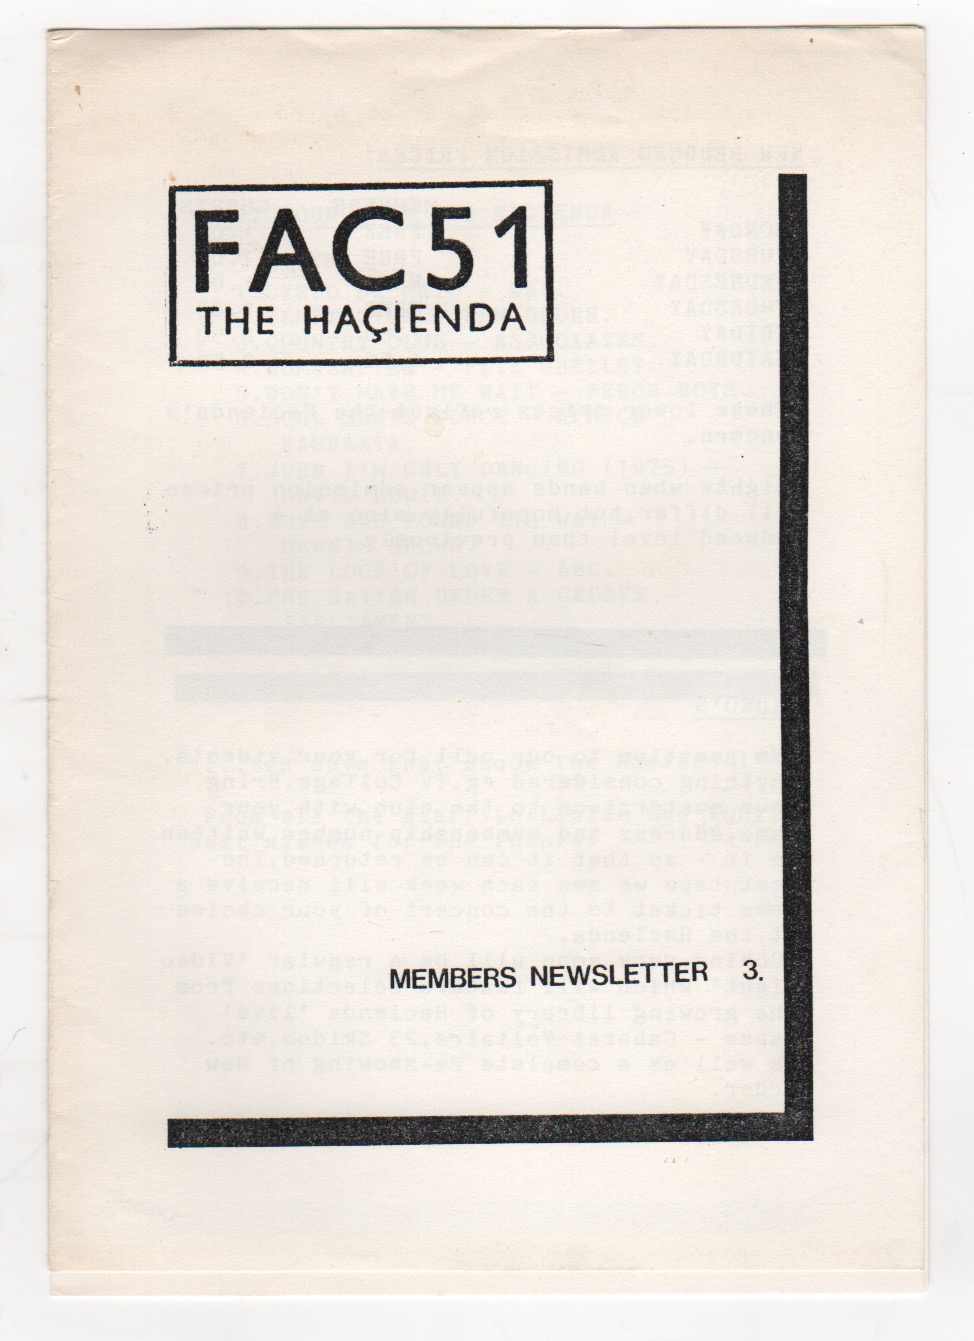 96. [Factory Records]. SAVAGE, Jon. FAC51 - THE HACIENDA MEMBERS NEWSLETTER [5 issues: Nos. 3, 4, IV [4.5], 5, 6].